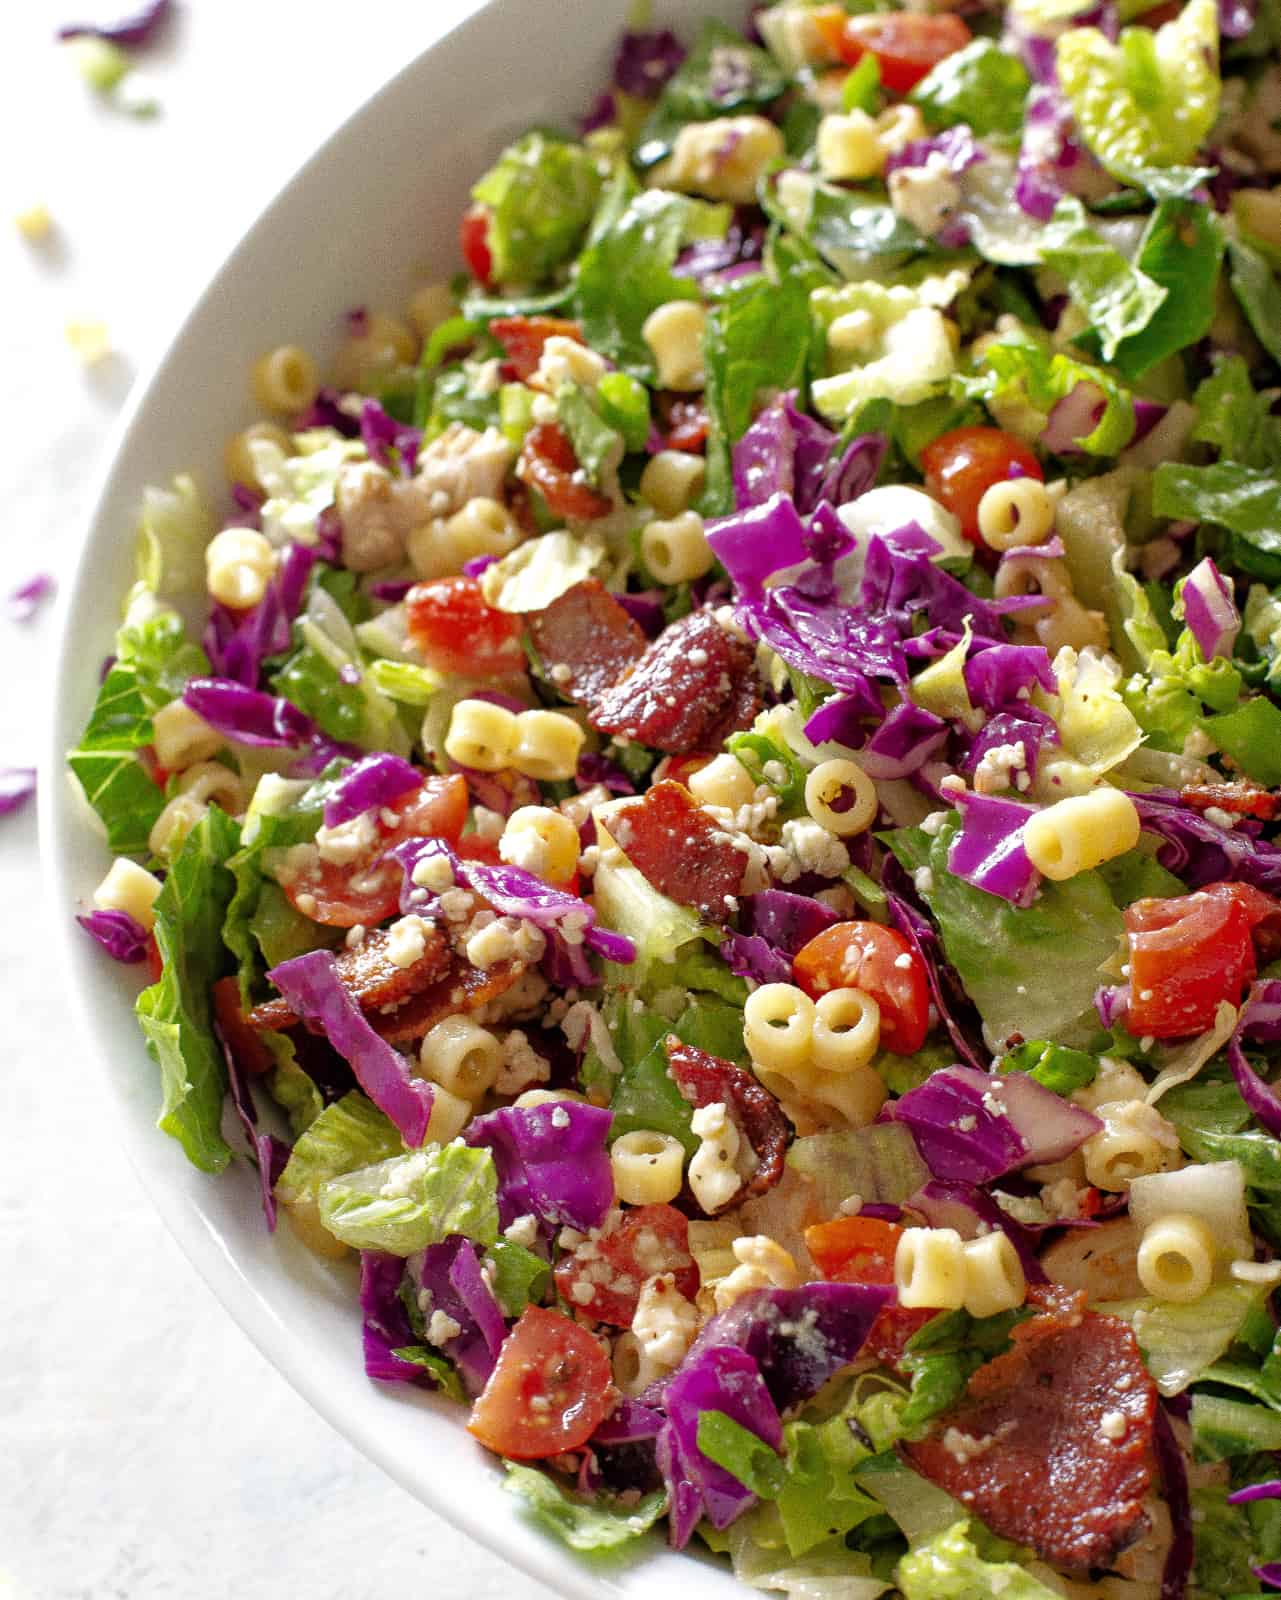 https://www.the-girl-who-ate-everything.com/wp-content/uploads/2020/07/portillos-chopped-salad-22.jpg